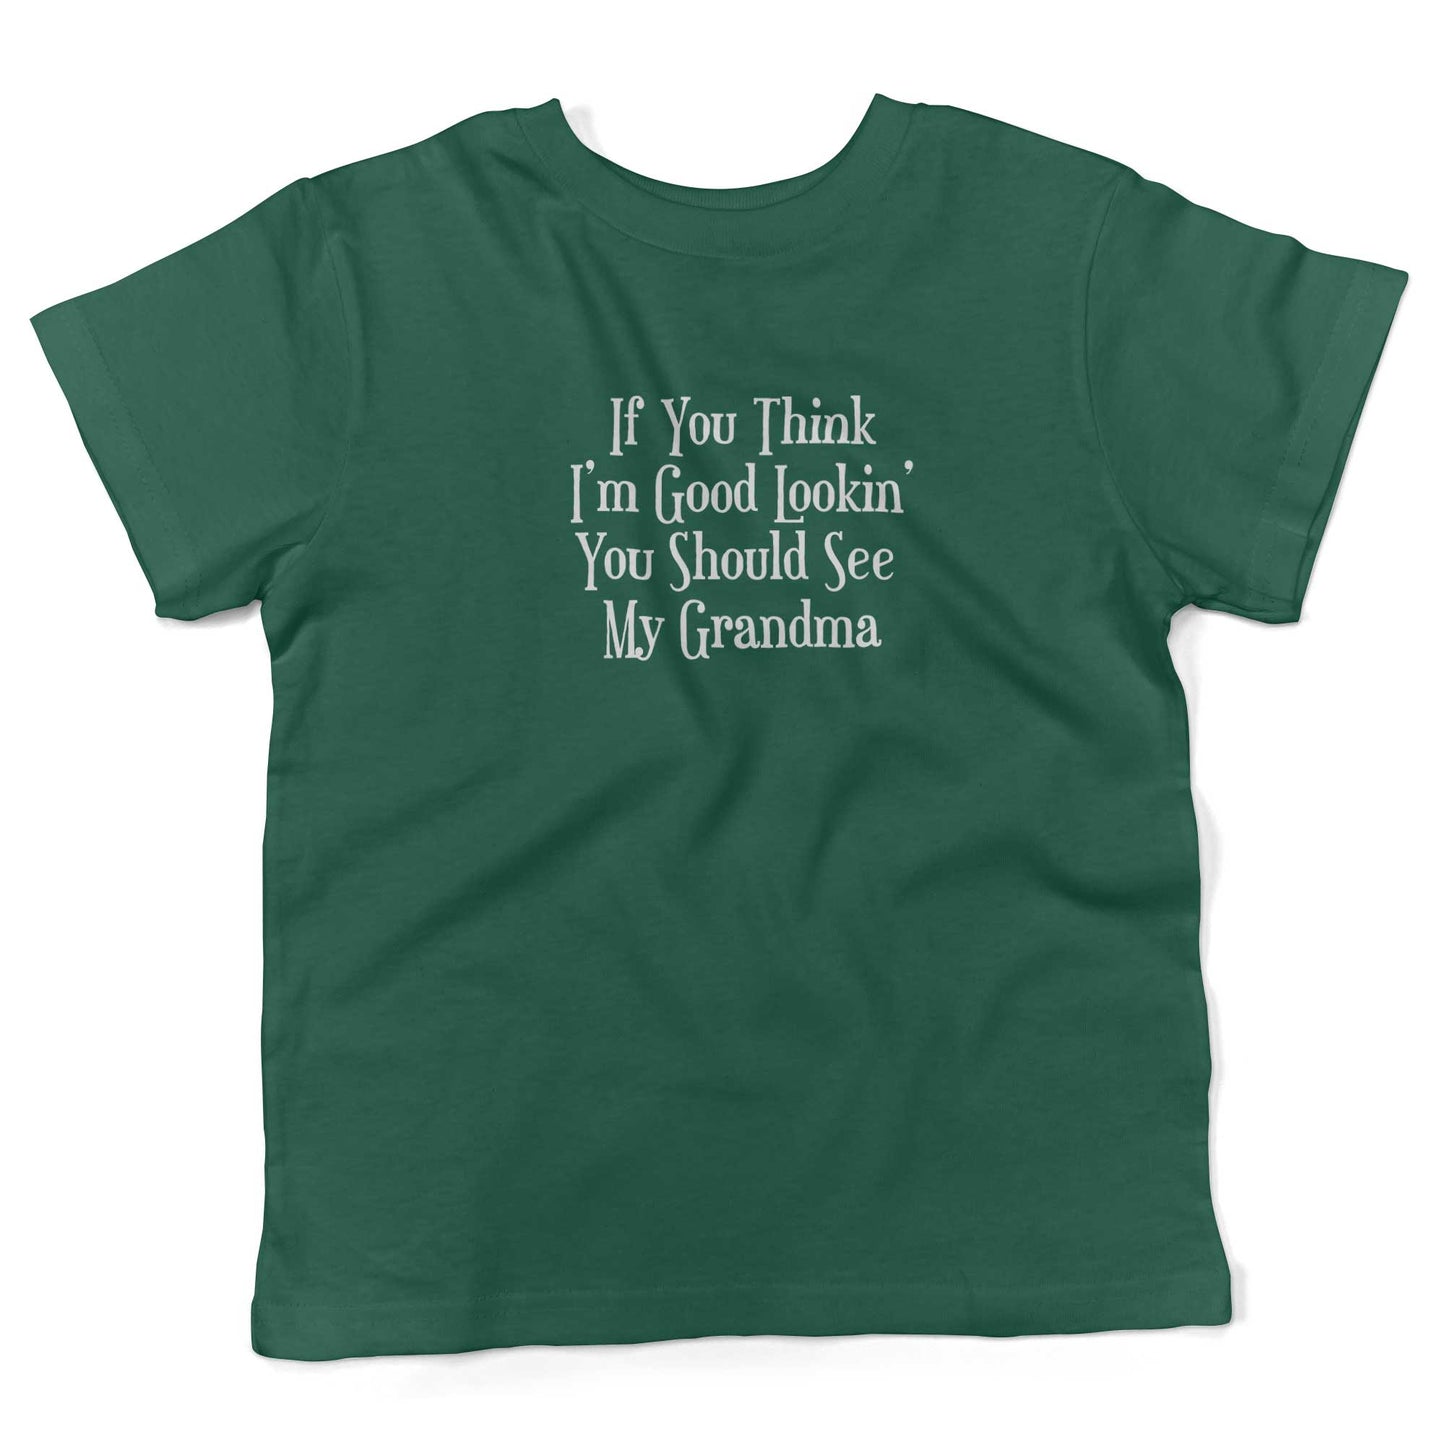 If You Think I'm Good Lookin', You Should See My Grandma Toddler Shirt-Kelly Green-2T